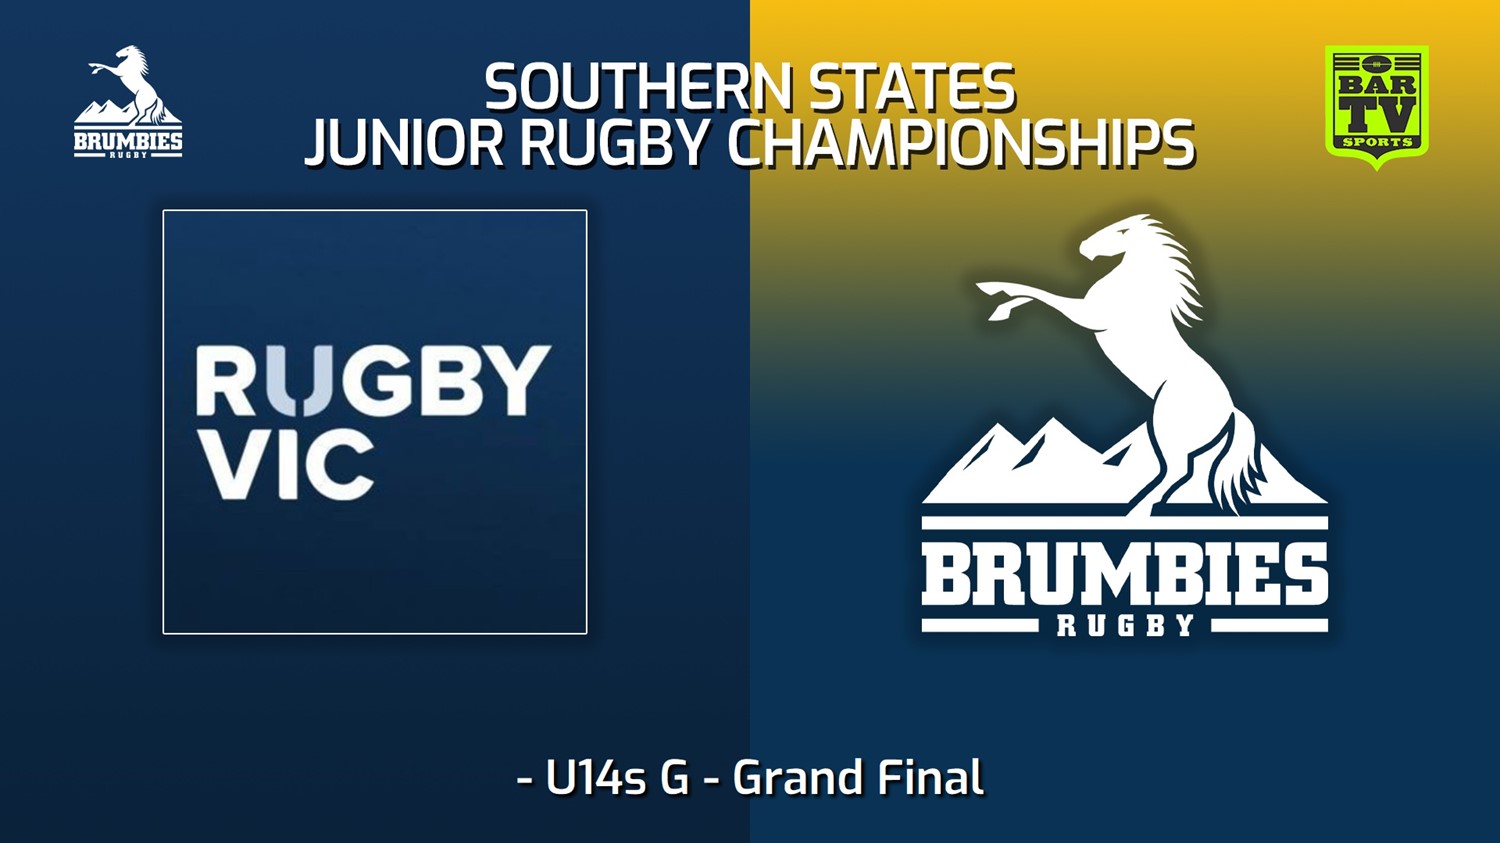 220713-2022 Southern States Junior Rugby Championships U14s G - Grand Final - Rugby Victoria v Brumbies Country Slate Image